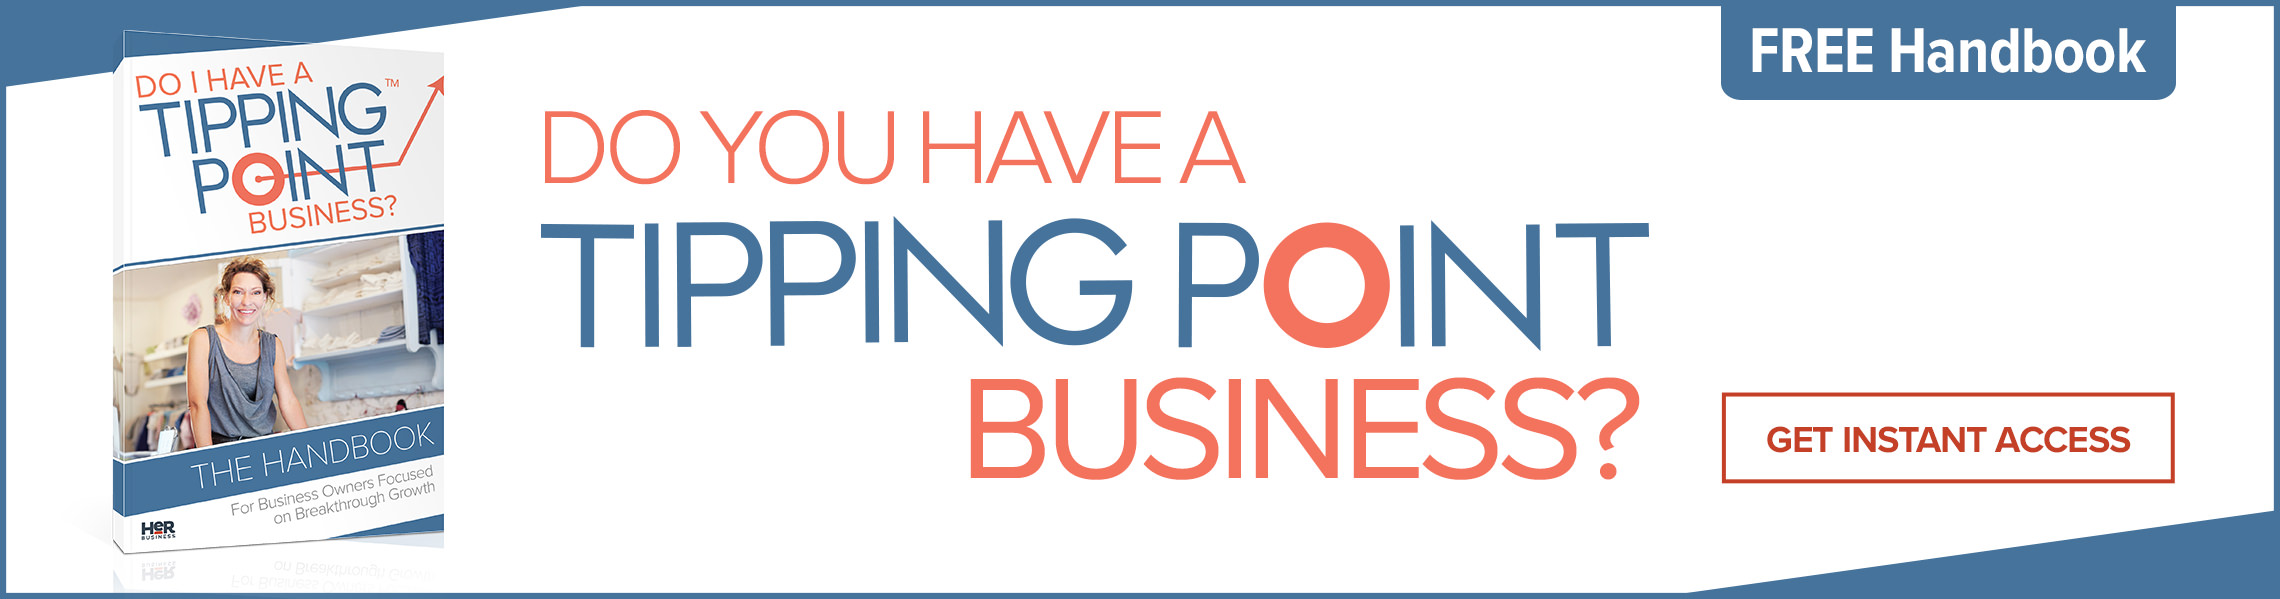 Do You Have a Tipping Point Business? - Free Handbook